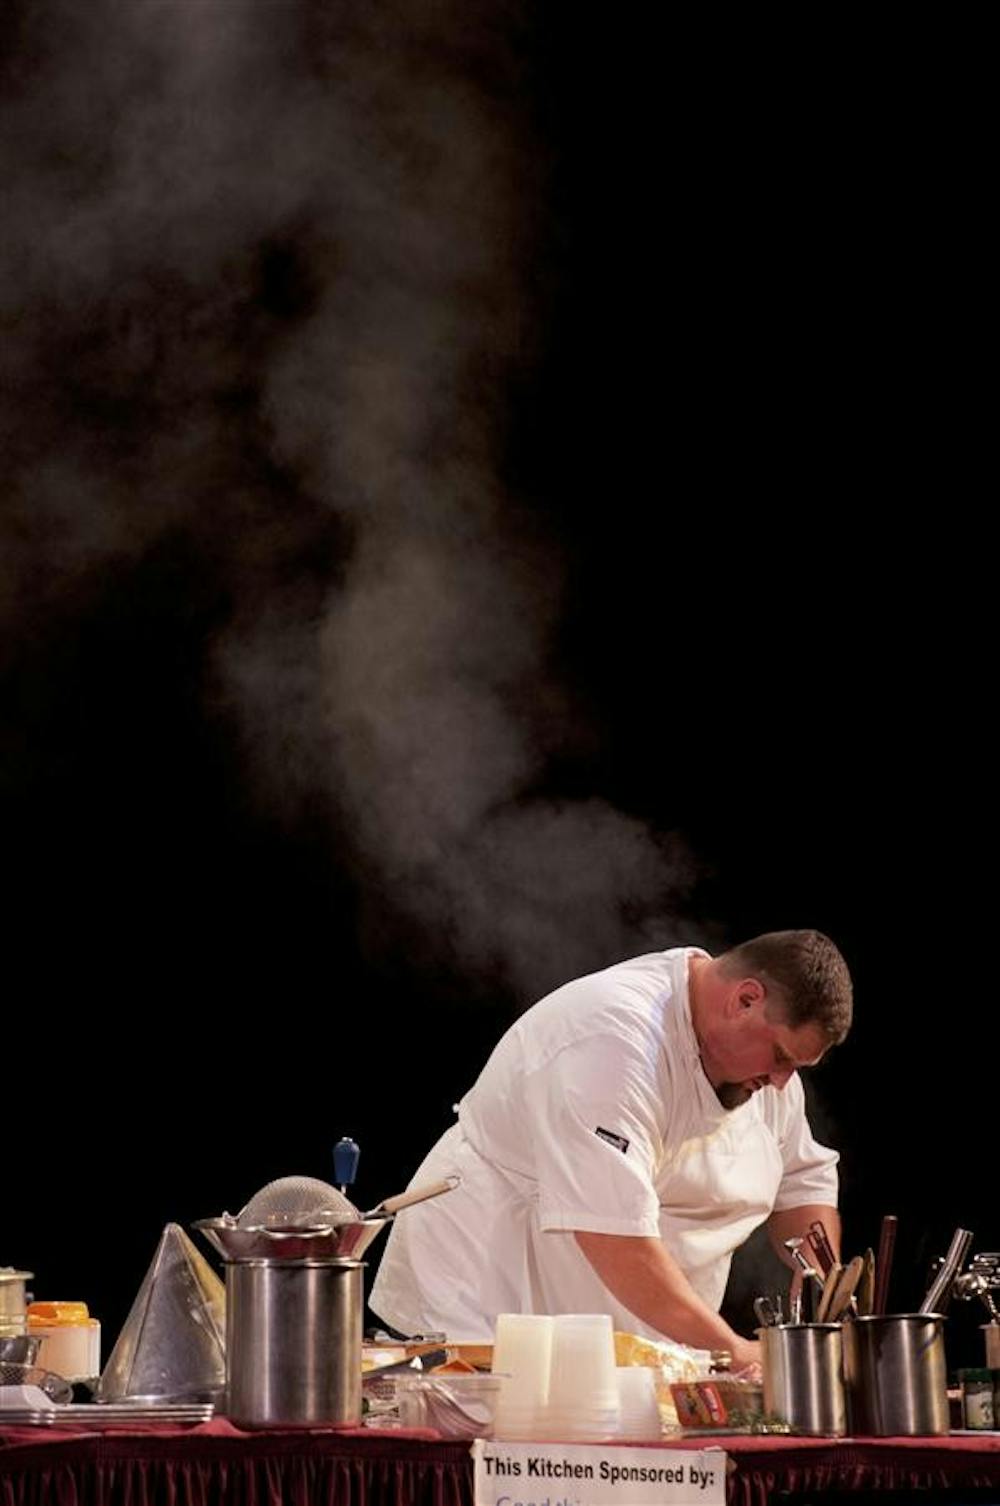 Dave Tallent, executive chef of Restaurant Tallent, prepares food during Bloomington's fourth annual Chefs' Challenge on Sunday at the Burskirk-Chumley Theater. Tallent, who won the one-hour cooking competition and its "Golden Spatula" award for the second year in a row, battled against representatives from two other restaurants in front of a live audience.